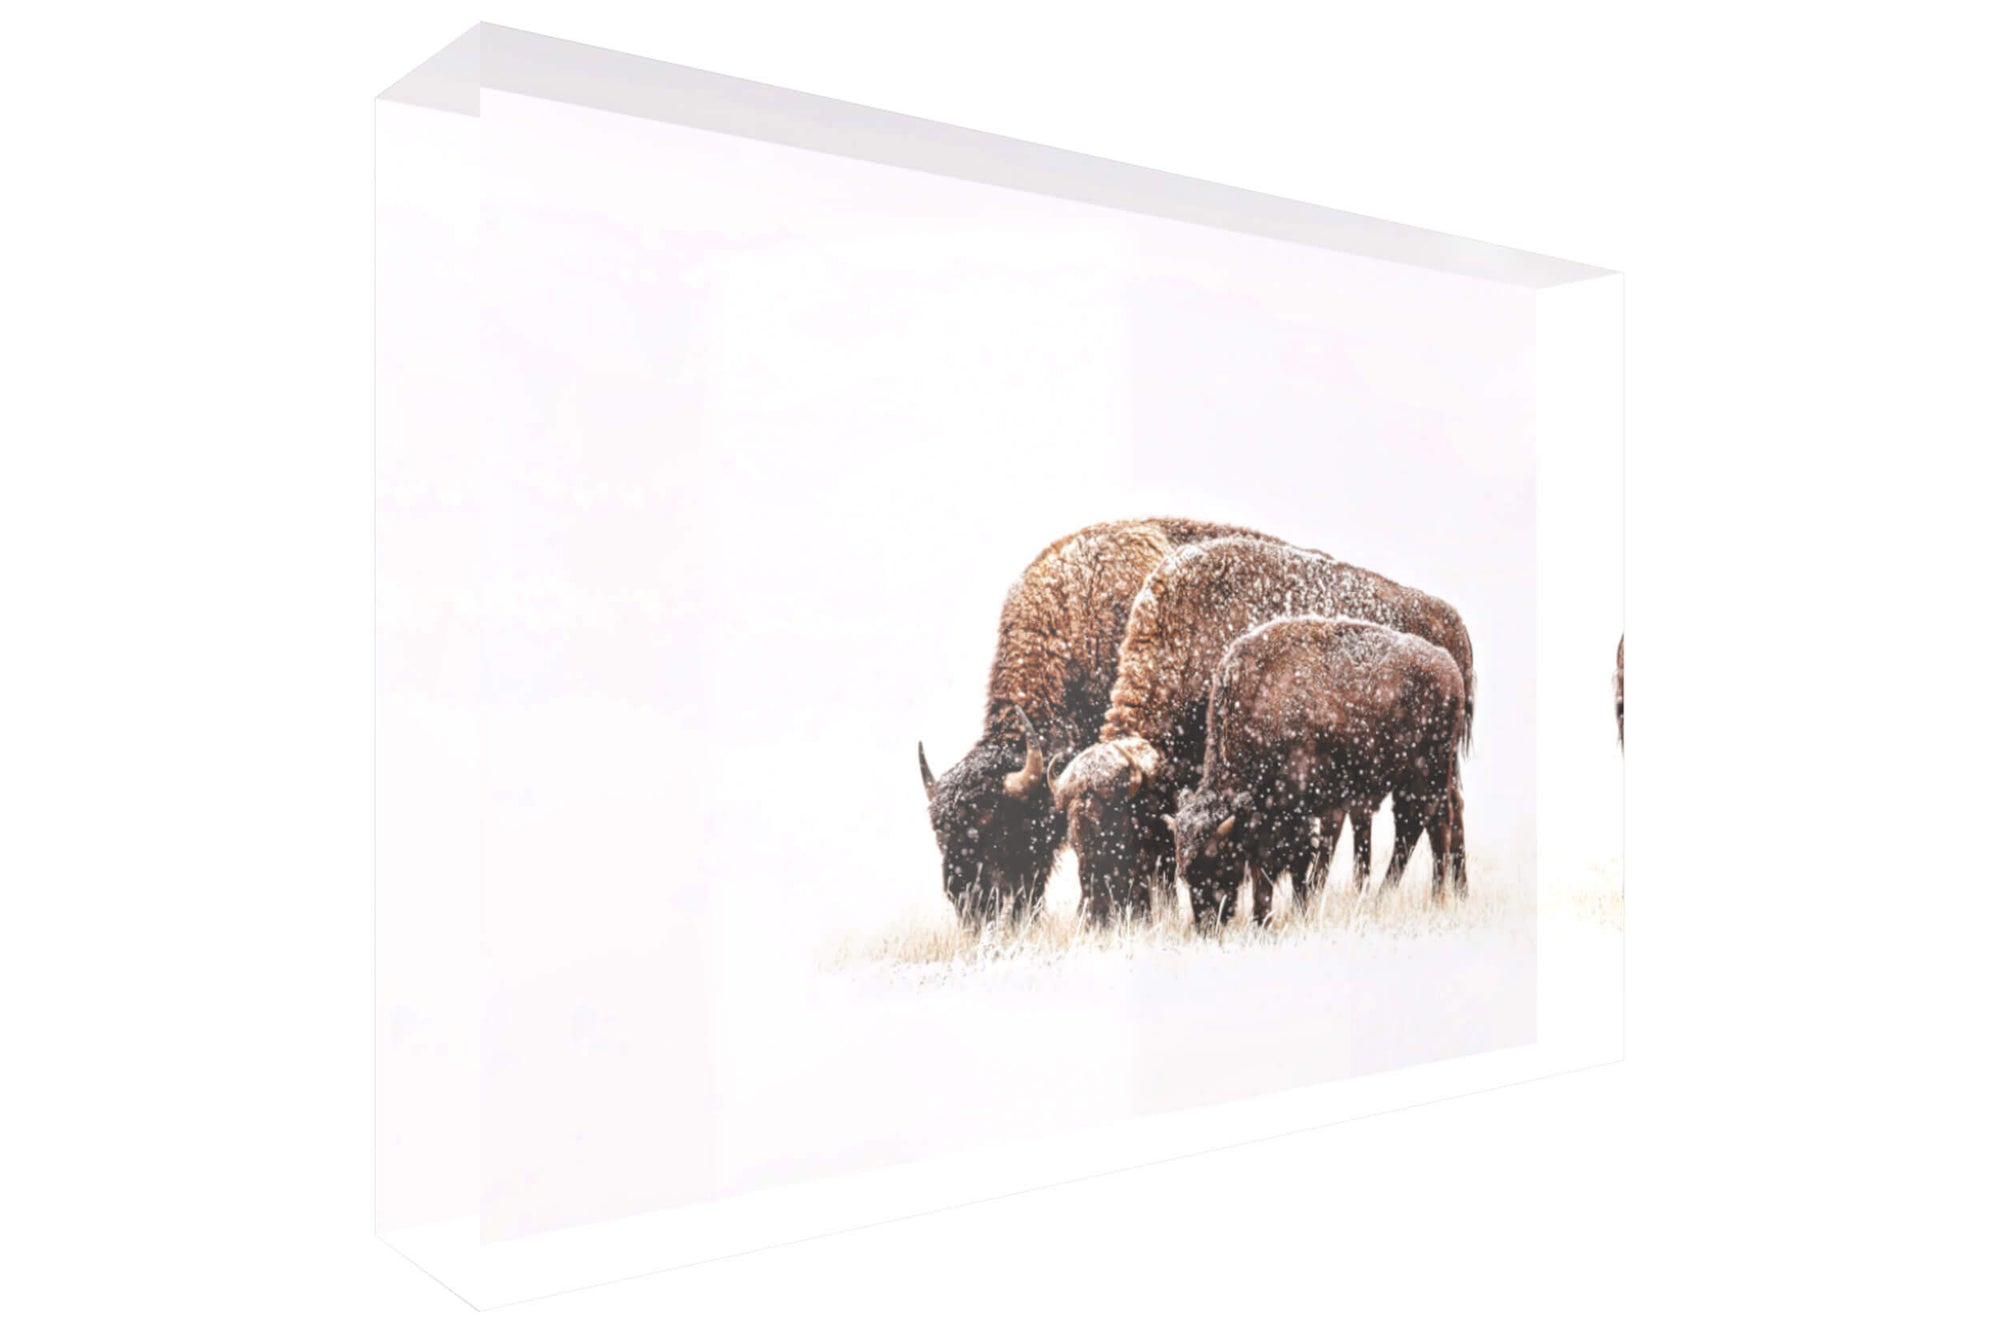 A picture of bison near Denver shown as an acrylic block.